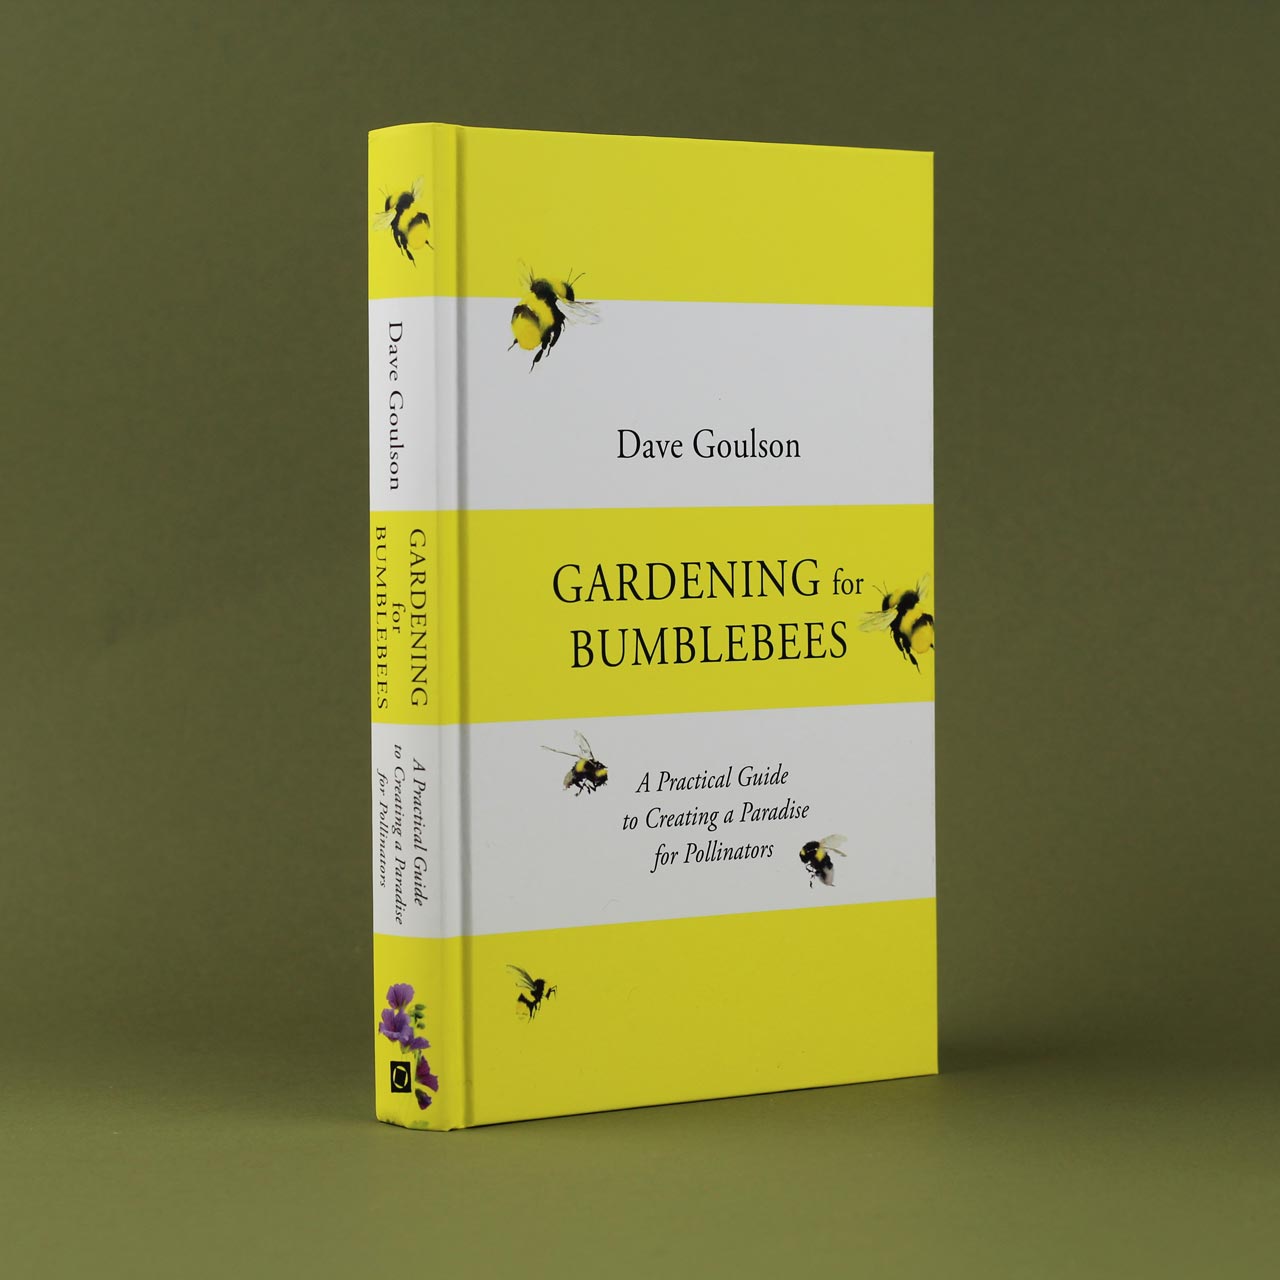 Gardening for Bumblebees : A Practical Guide to Creating a Paradise for Pollinators by Dave Goulson